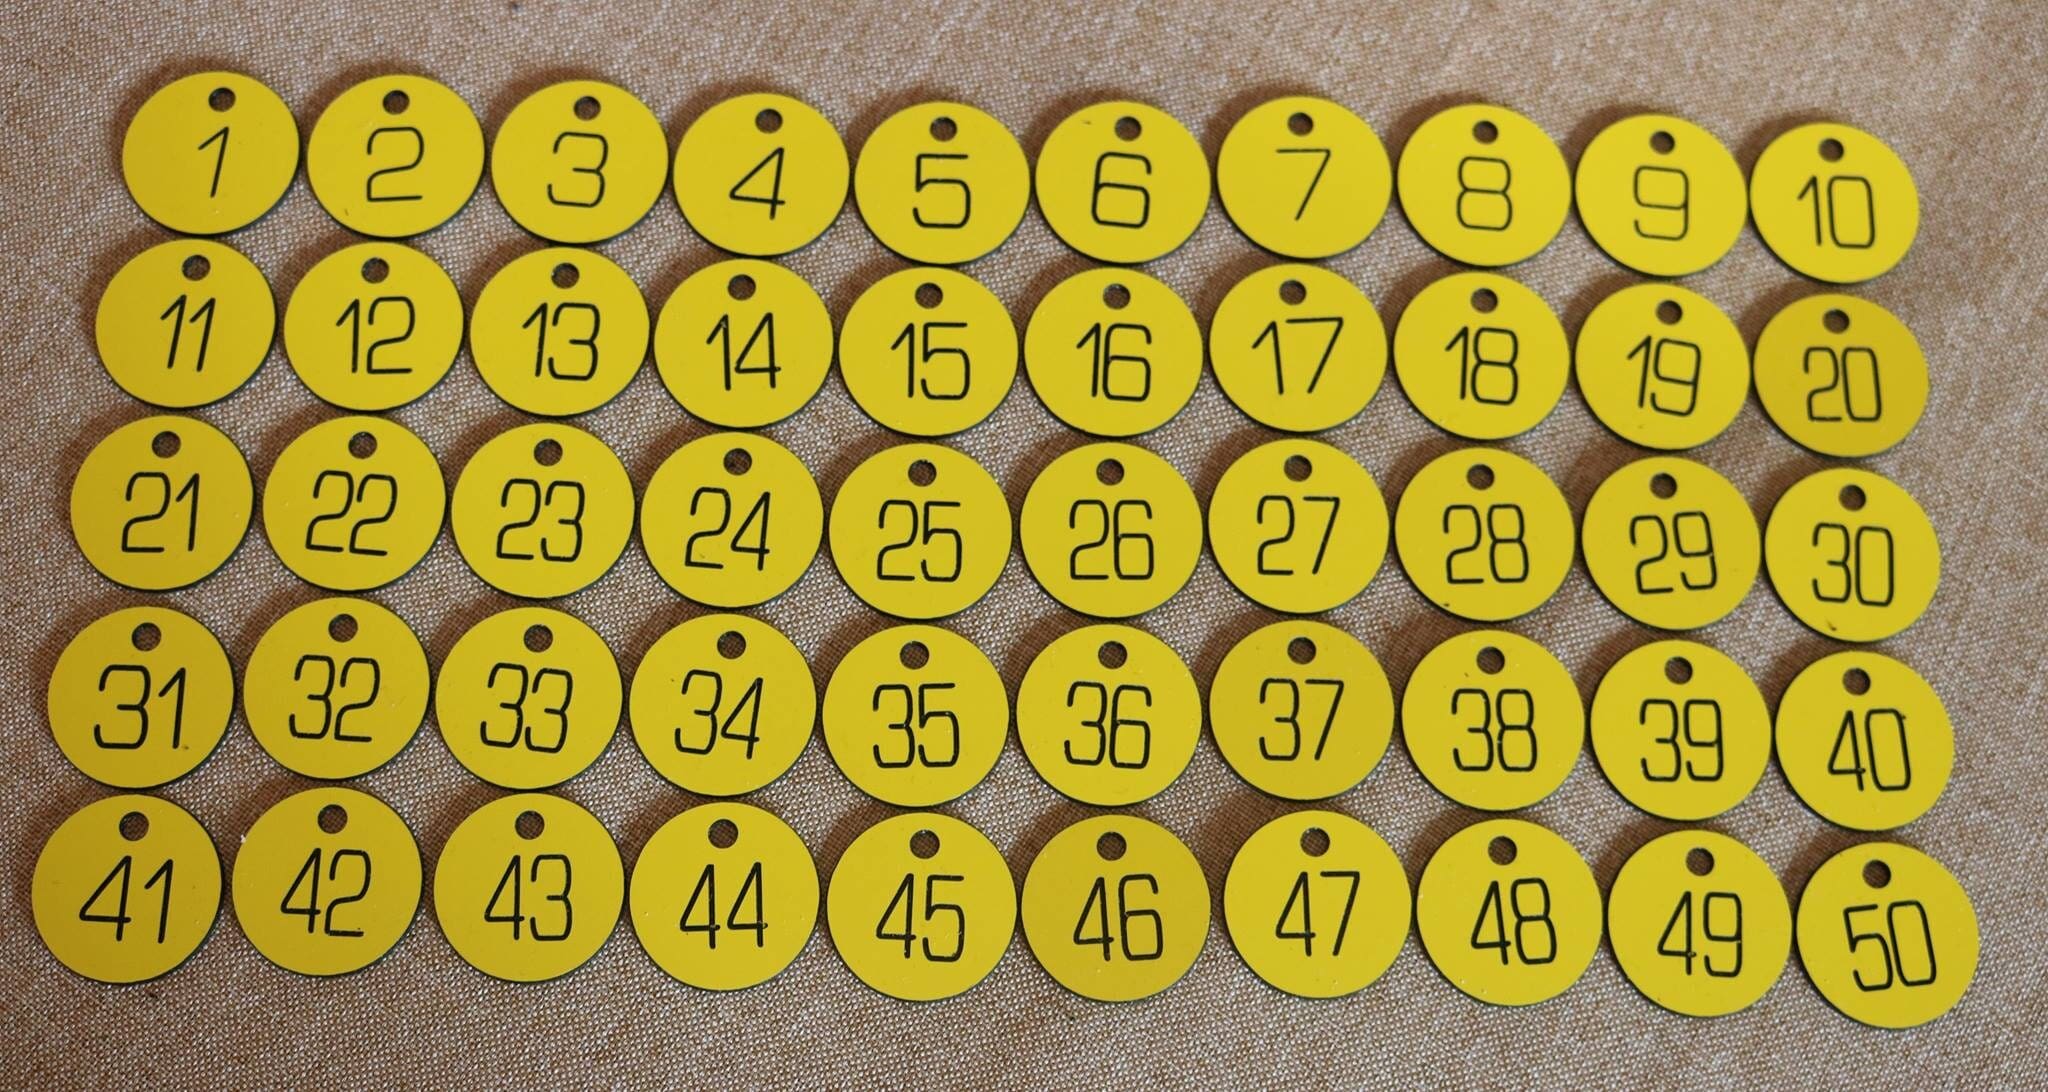 x3 table locker numbers Pubs Clubs Restaurant hotels 